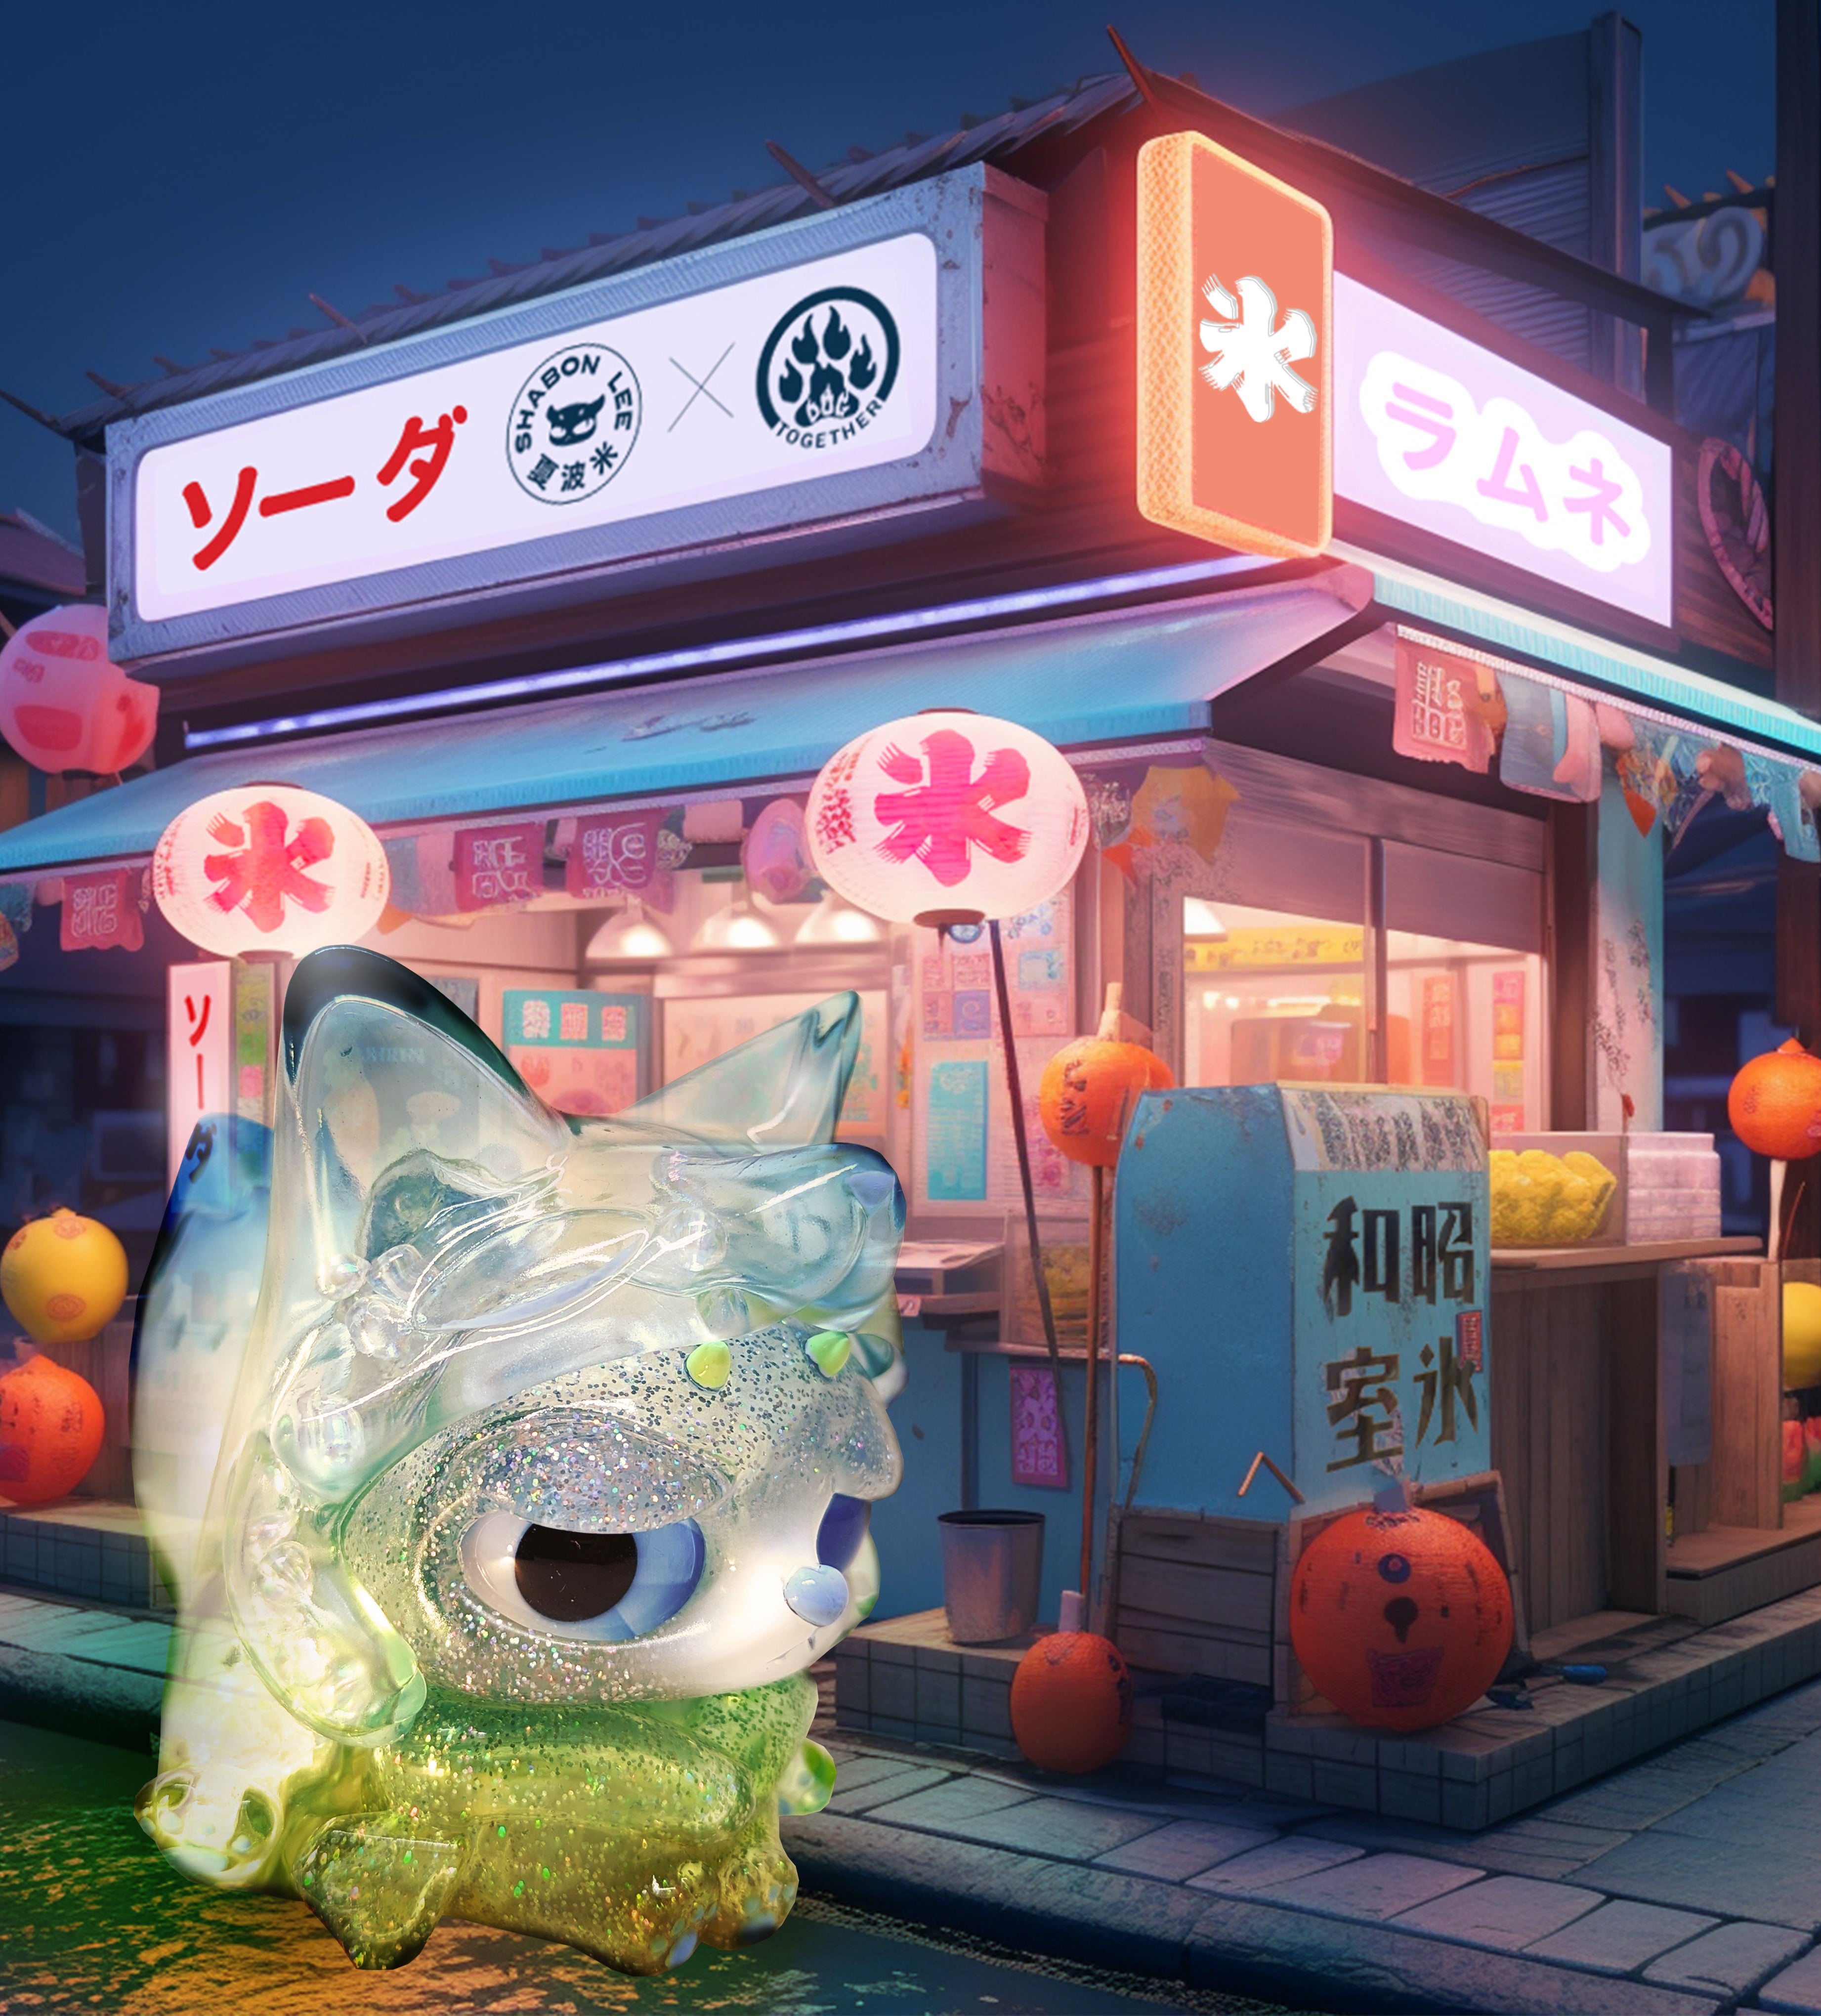 Cartoon character in front of store with plastic cat statue, round orange object, paper lantern, orange, and yellow balloon.